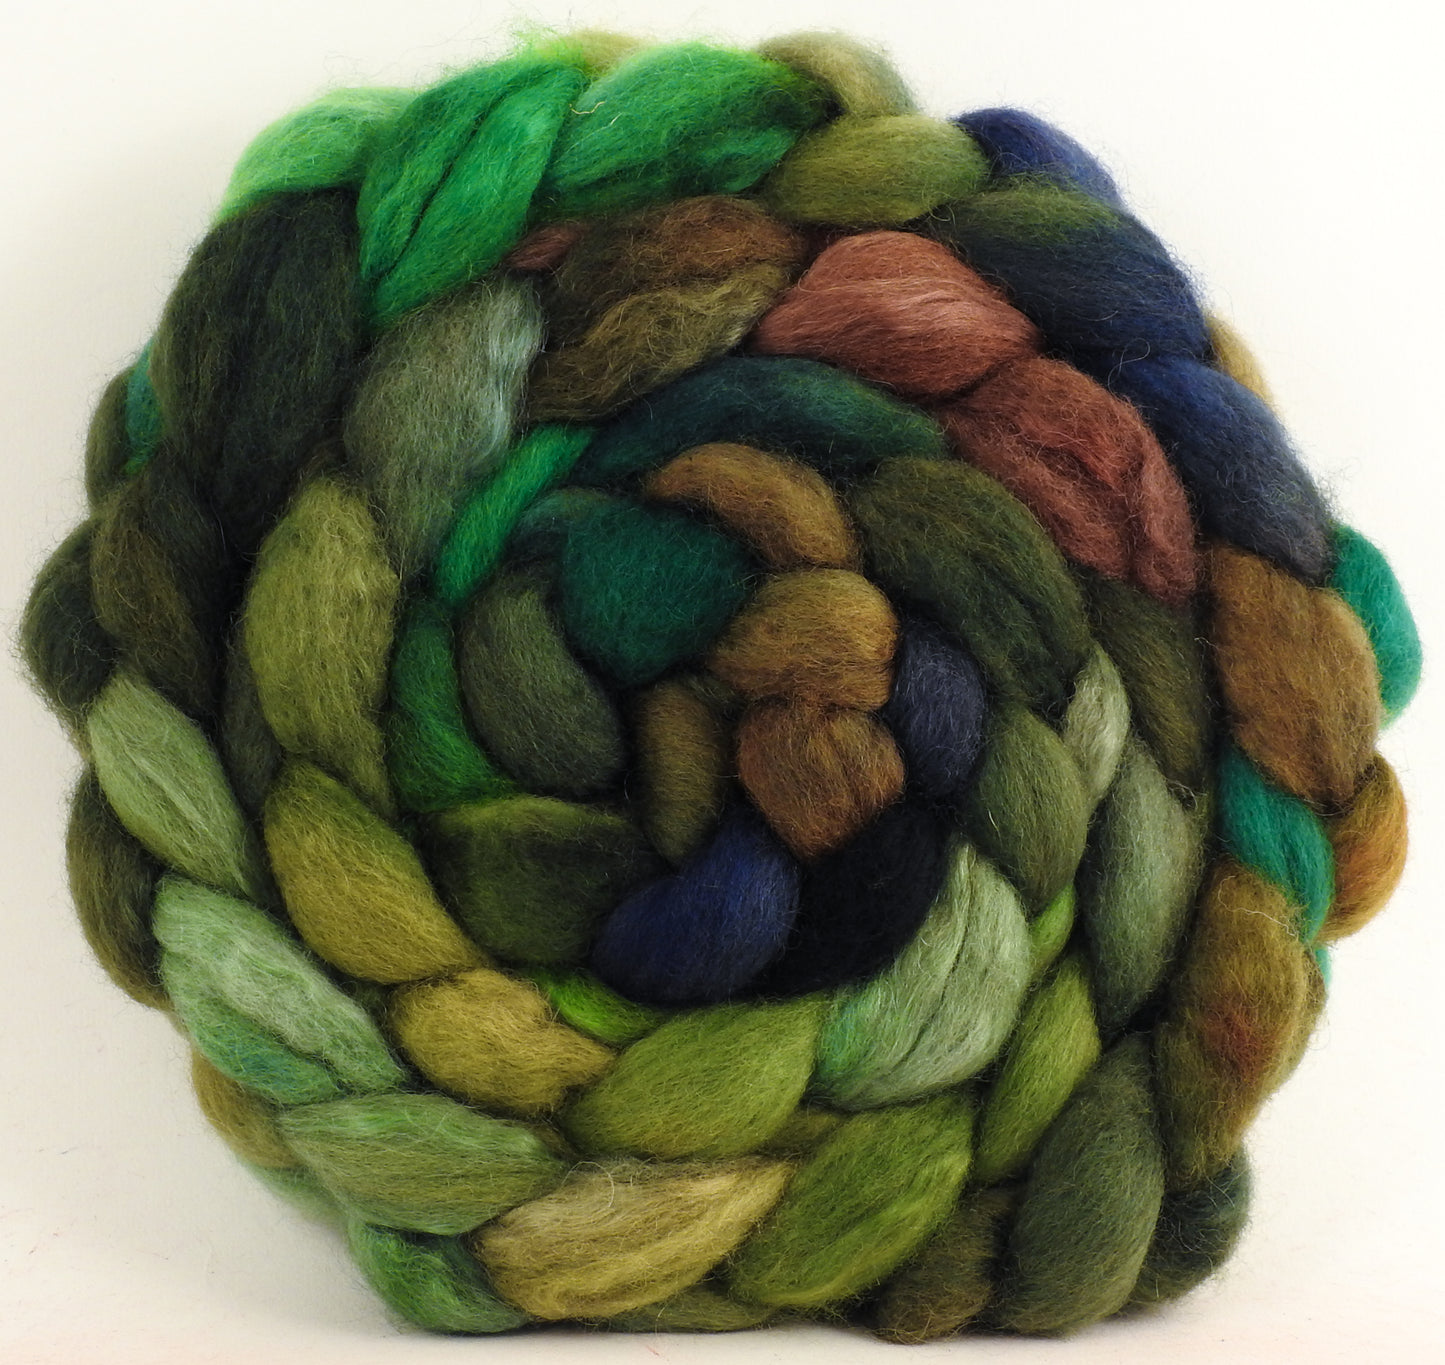 Mossy - Blue-faced Leicester/ Mohair (70/30) - 5.8 oz.